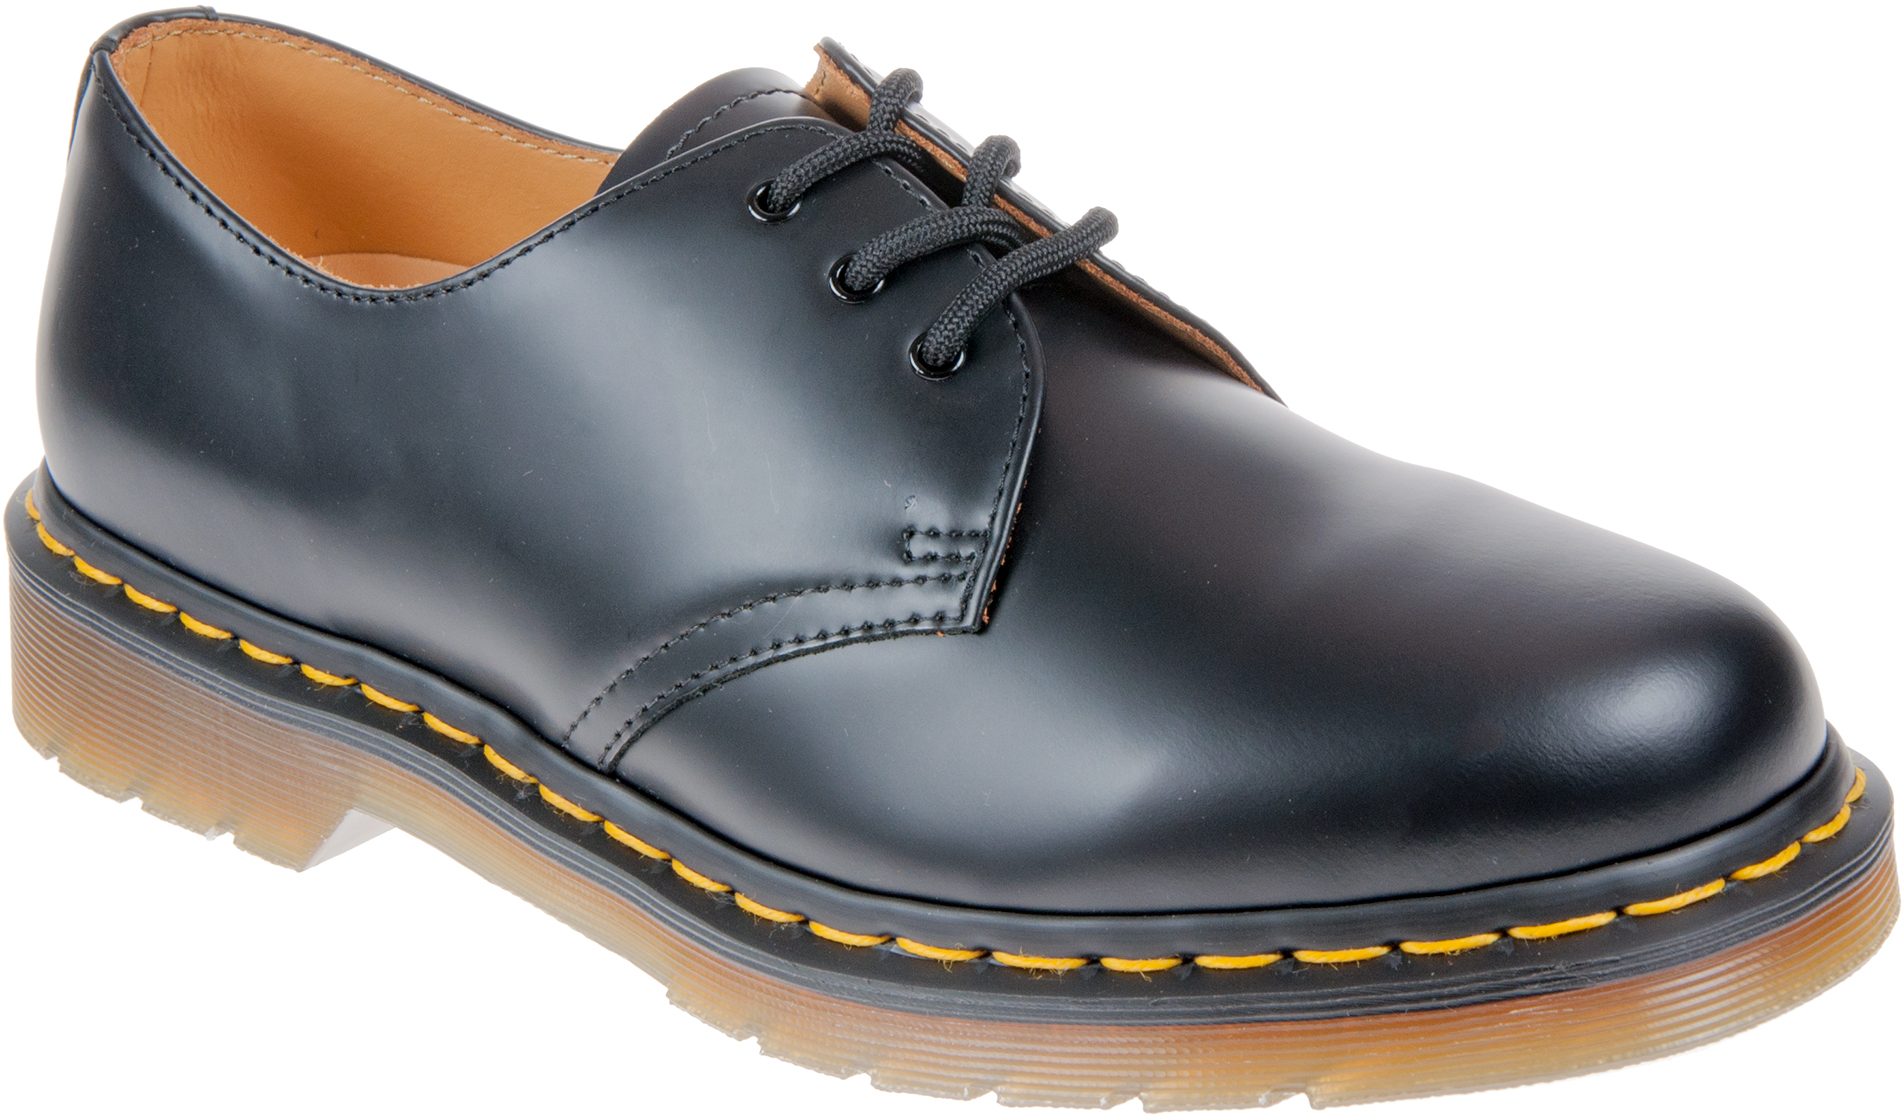 Dr. Martens 1461 Black Smooth / Yellow Stitch 11838002 - Casual Shoes ...